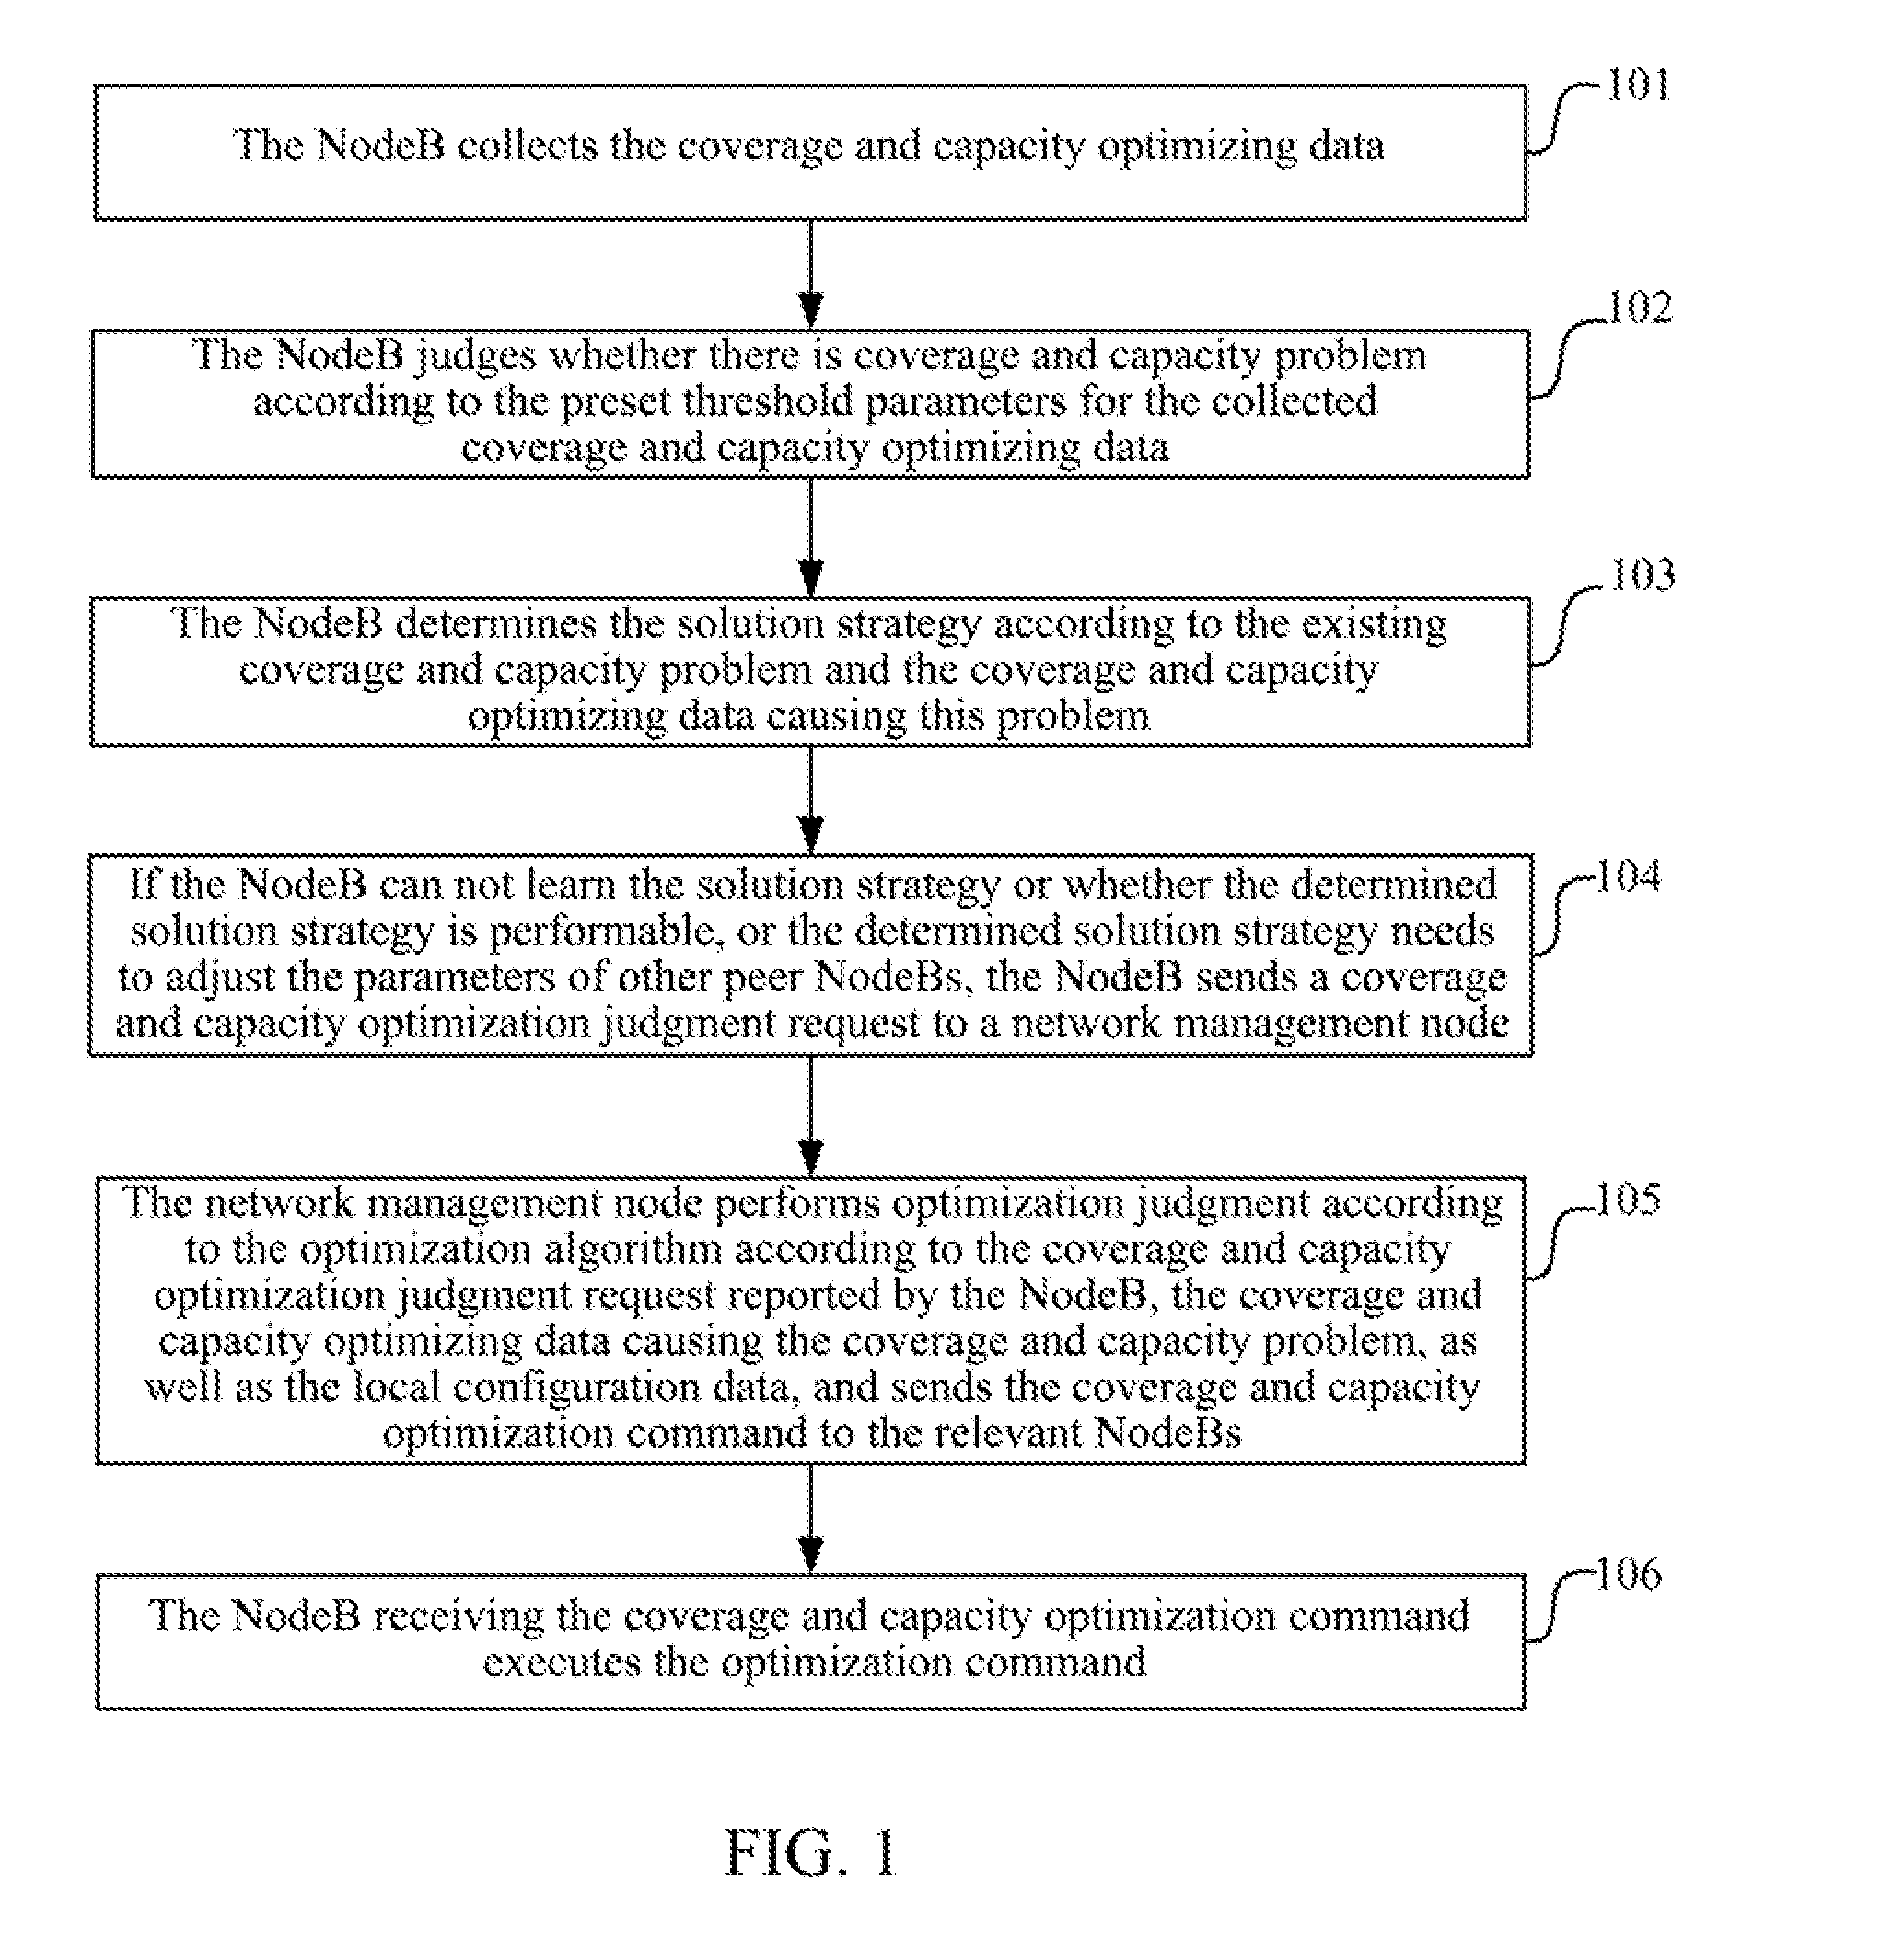 Method and System for Optimizing Network Coverage and Capacity